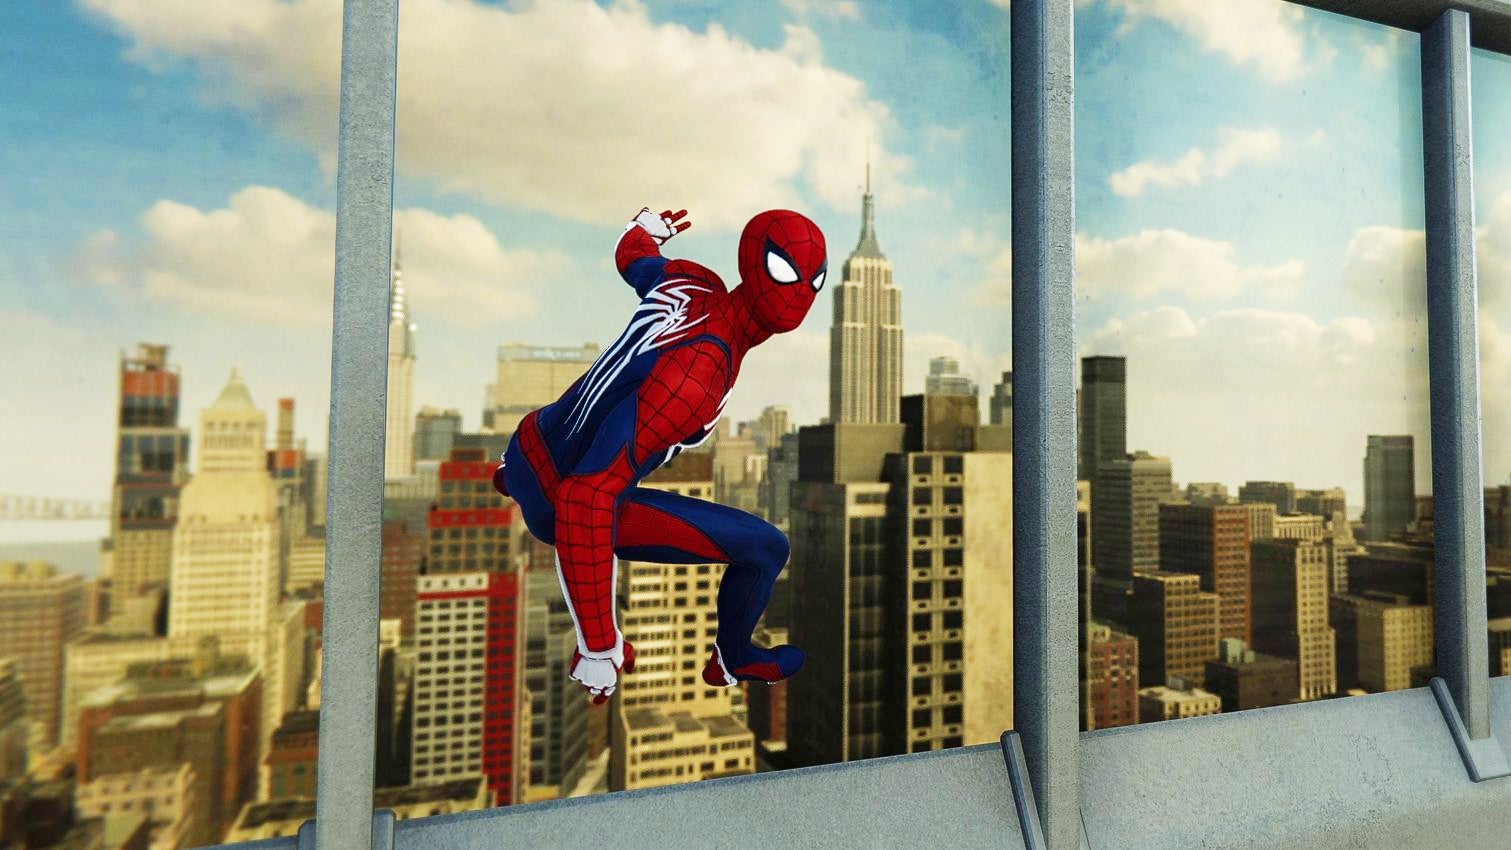 Marvel's Spider-Man Remastered review: a fun hero epic that takes the  wall-crawler to new heights | Rock Paper Shotgun